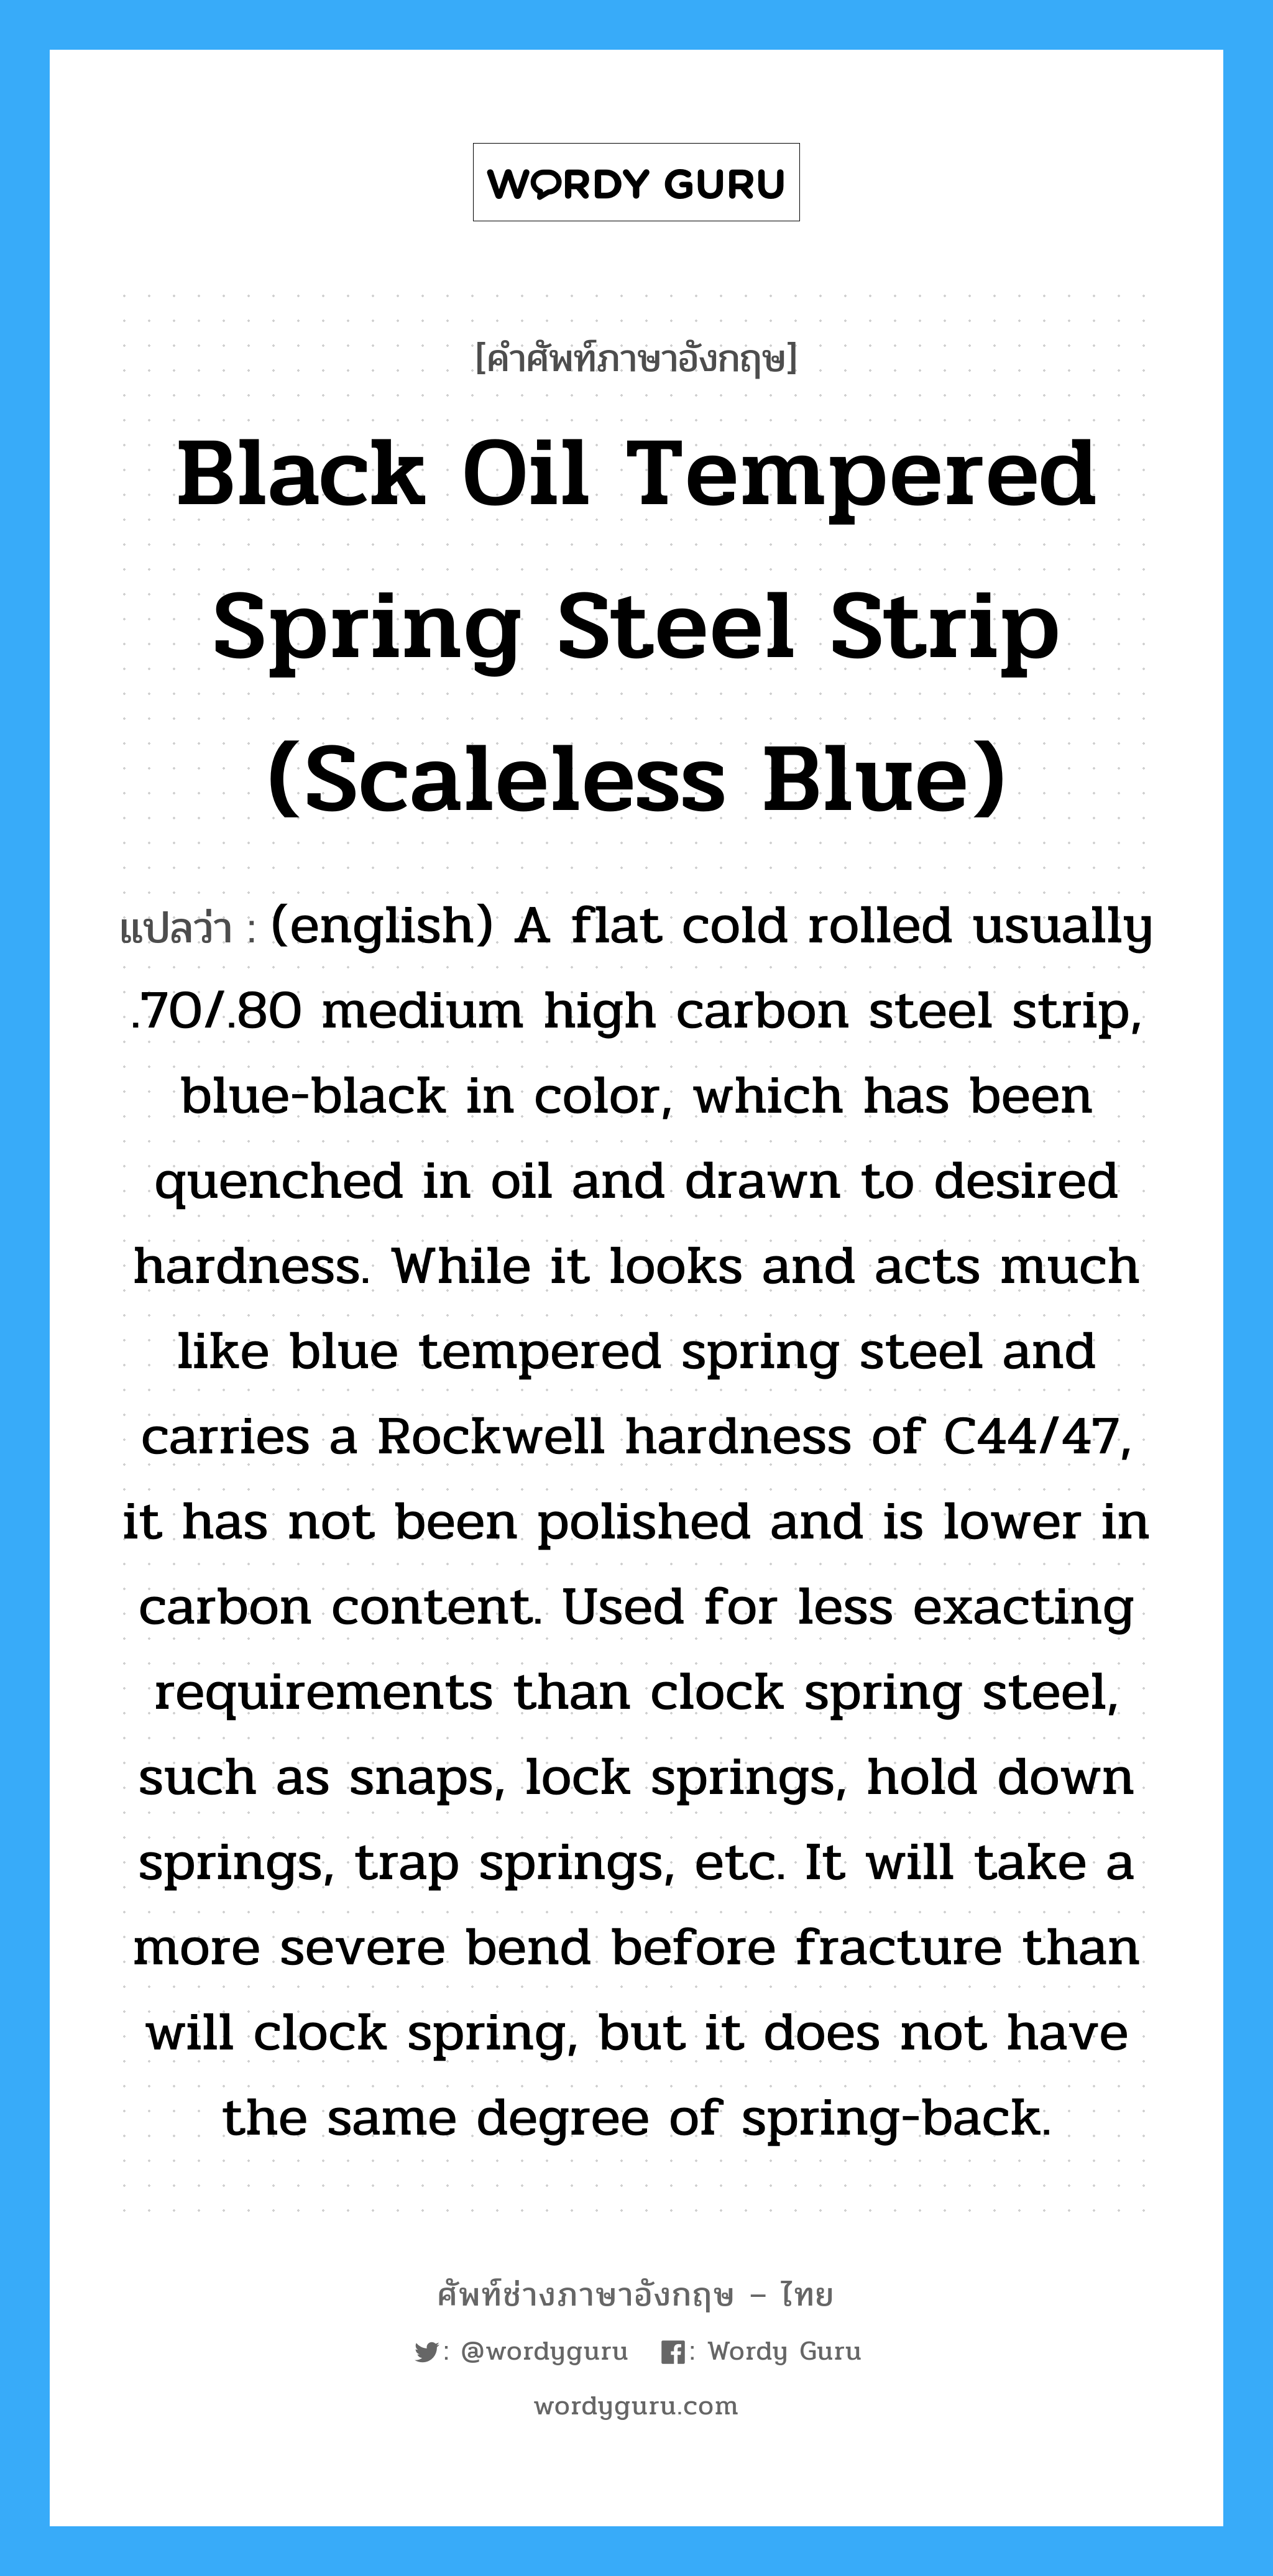 Black Oil Tempered Spring Steel Strip (Scaleless Blue) แปลว่า?, คำศัพท์ช่างภาษาอังกฤษ - ไทย Black Oil Tempered Spring Steel Strip (Scaleless Blue) คำศัพท์ภาษาอังกฤษ Black Oil Tempered Spring Steel Strip (Scaleless Blue) แปลว่า (english) A flat cold rolled usually .70/.80 medium high carbon steel strip, blue-black in color, which has been quenched in oil and drawn to desired hardness. While it looks and acts much like blue tempered spring steel and carries a Rockwell hardness of C44/47, it has not been polished and is lower in carbon content. Used for less exacting requirements than clock spring steel, such as snaps, lock springs, hold down springs, trap springs, etc. It will take a more severe bend before fracture than will clock spring, but it does not have the same degree of spring-back.